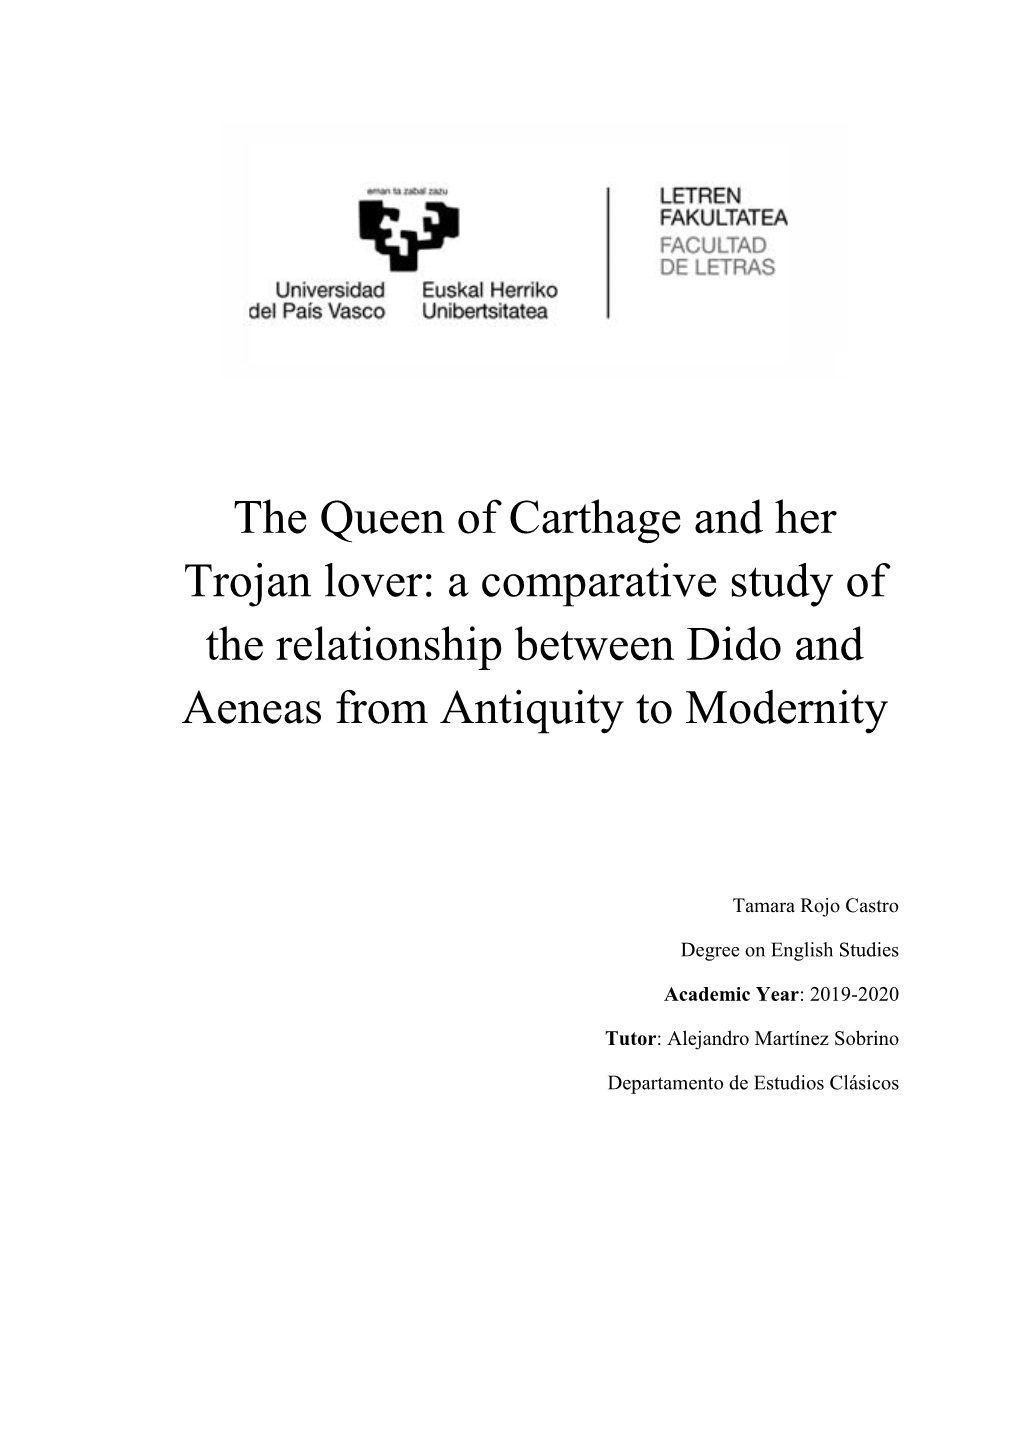 The Queen of Carthage and Her Trojan Lover: a Comparative Study of the Relationship Between Dido and Aeneas from Antiquity to Modernity